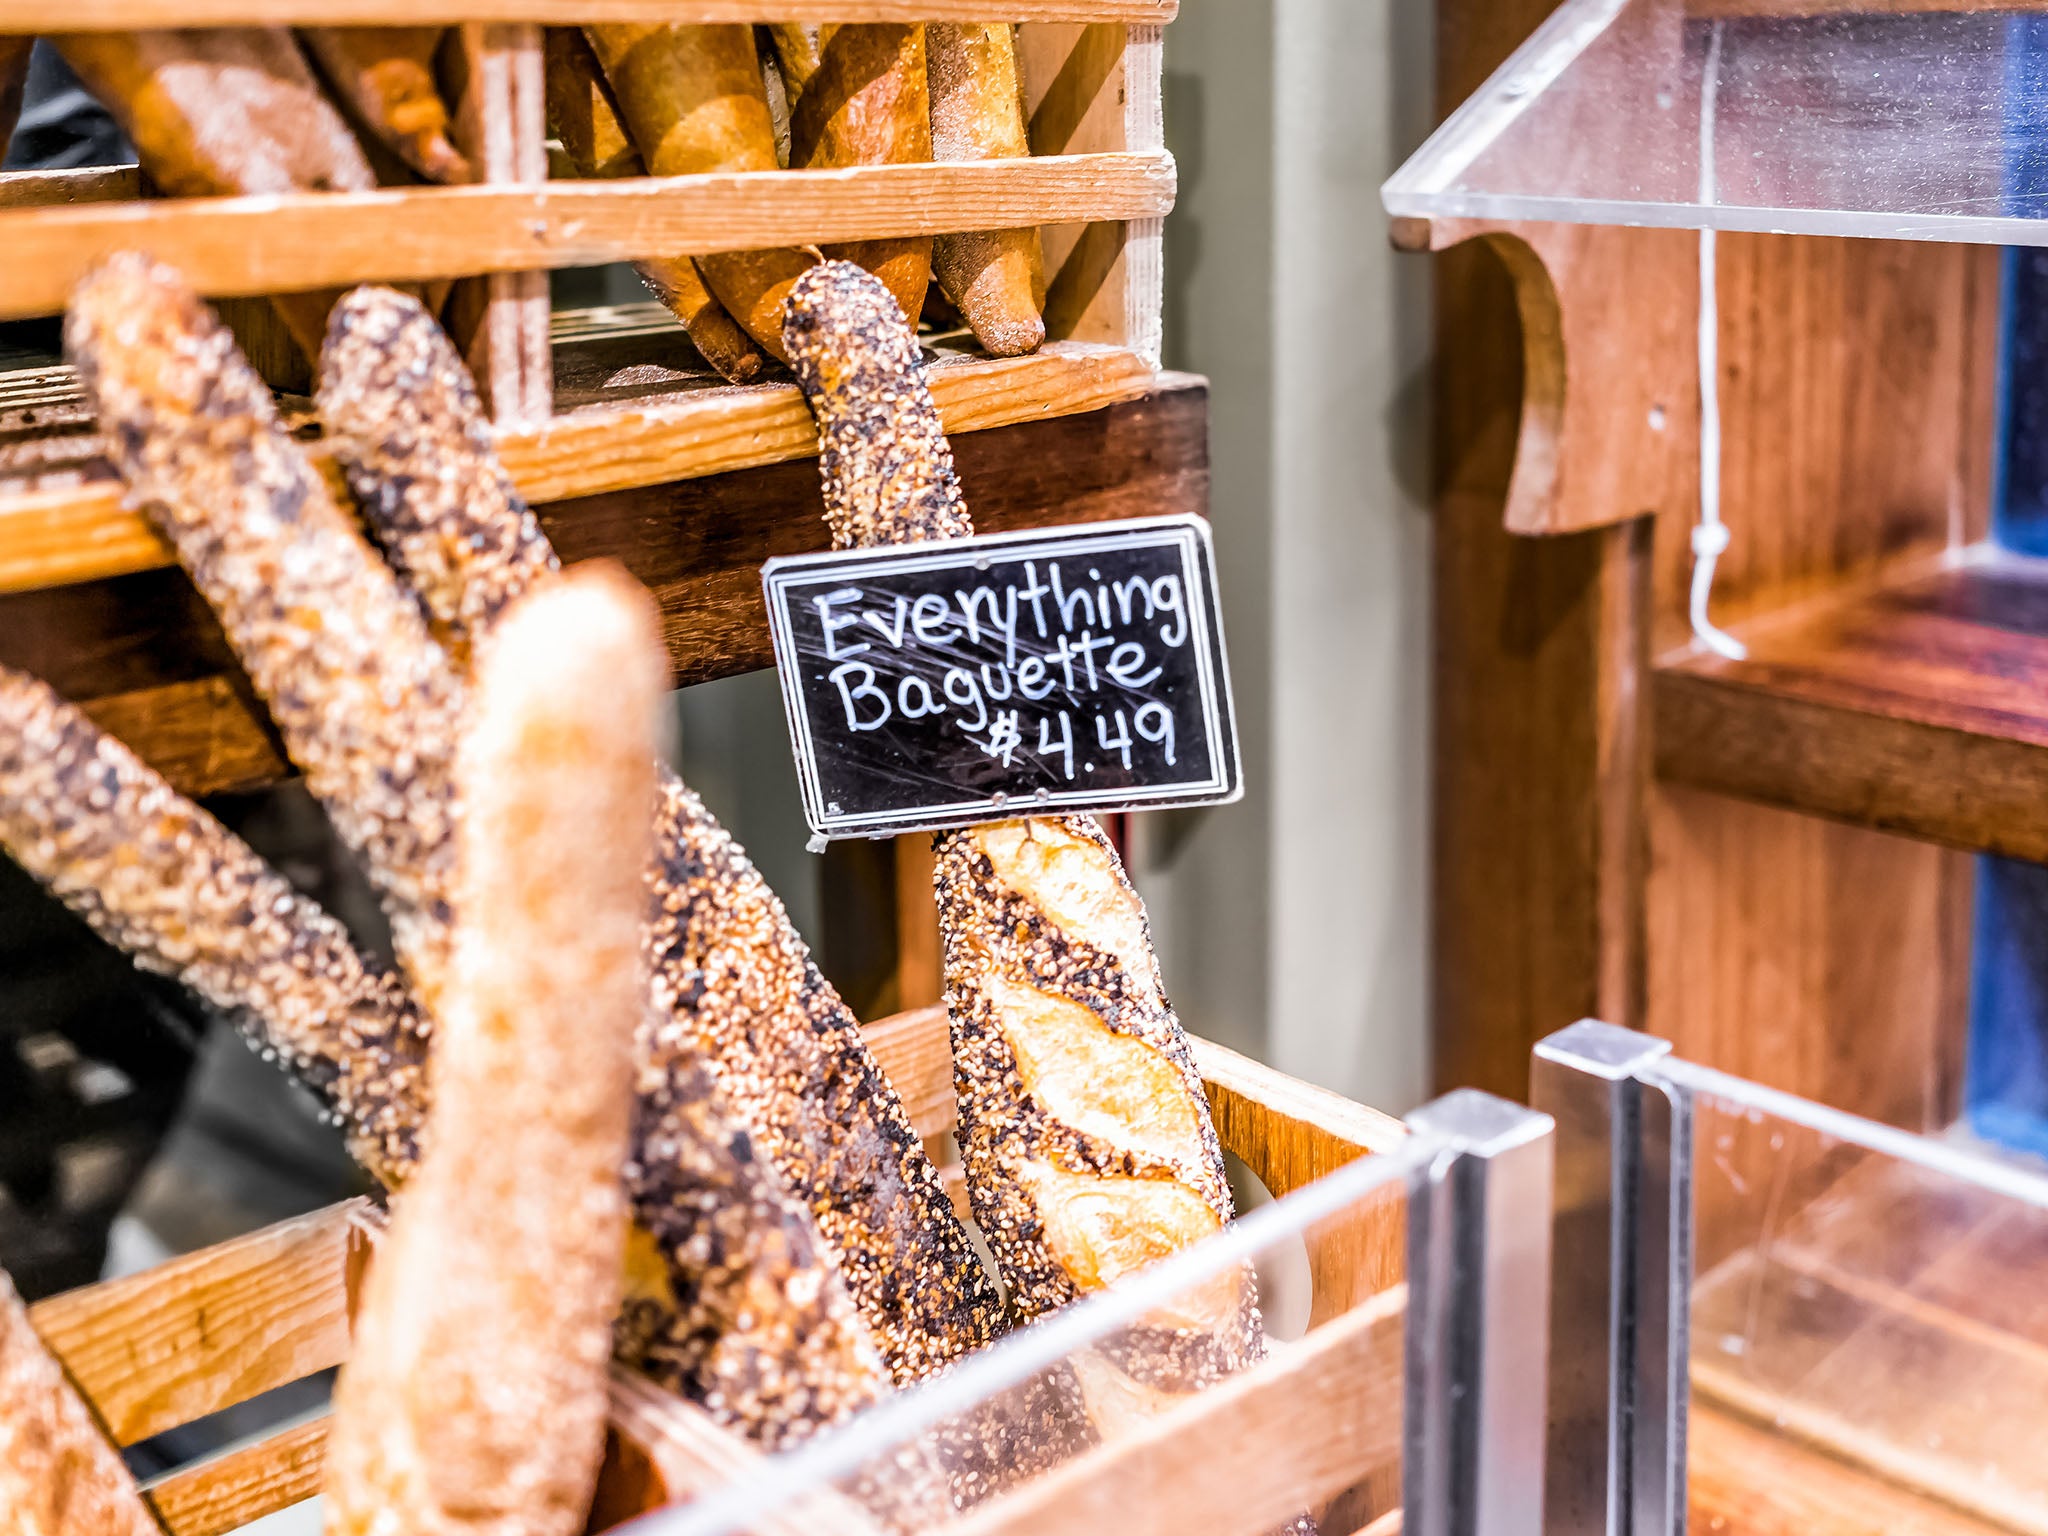 Poppy seed is just one of the natural ingredients that could harm you